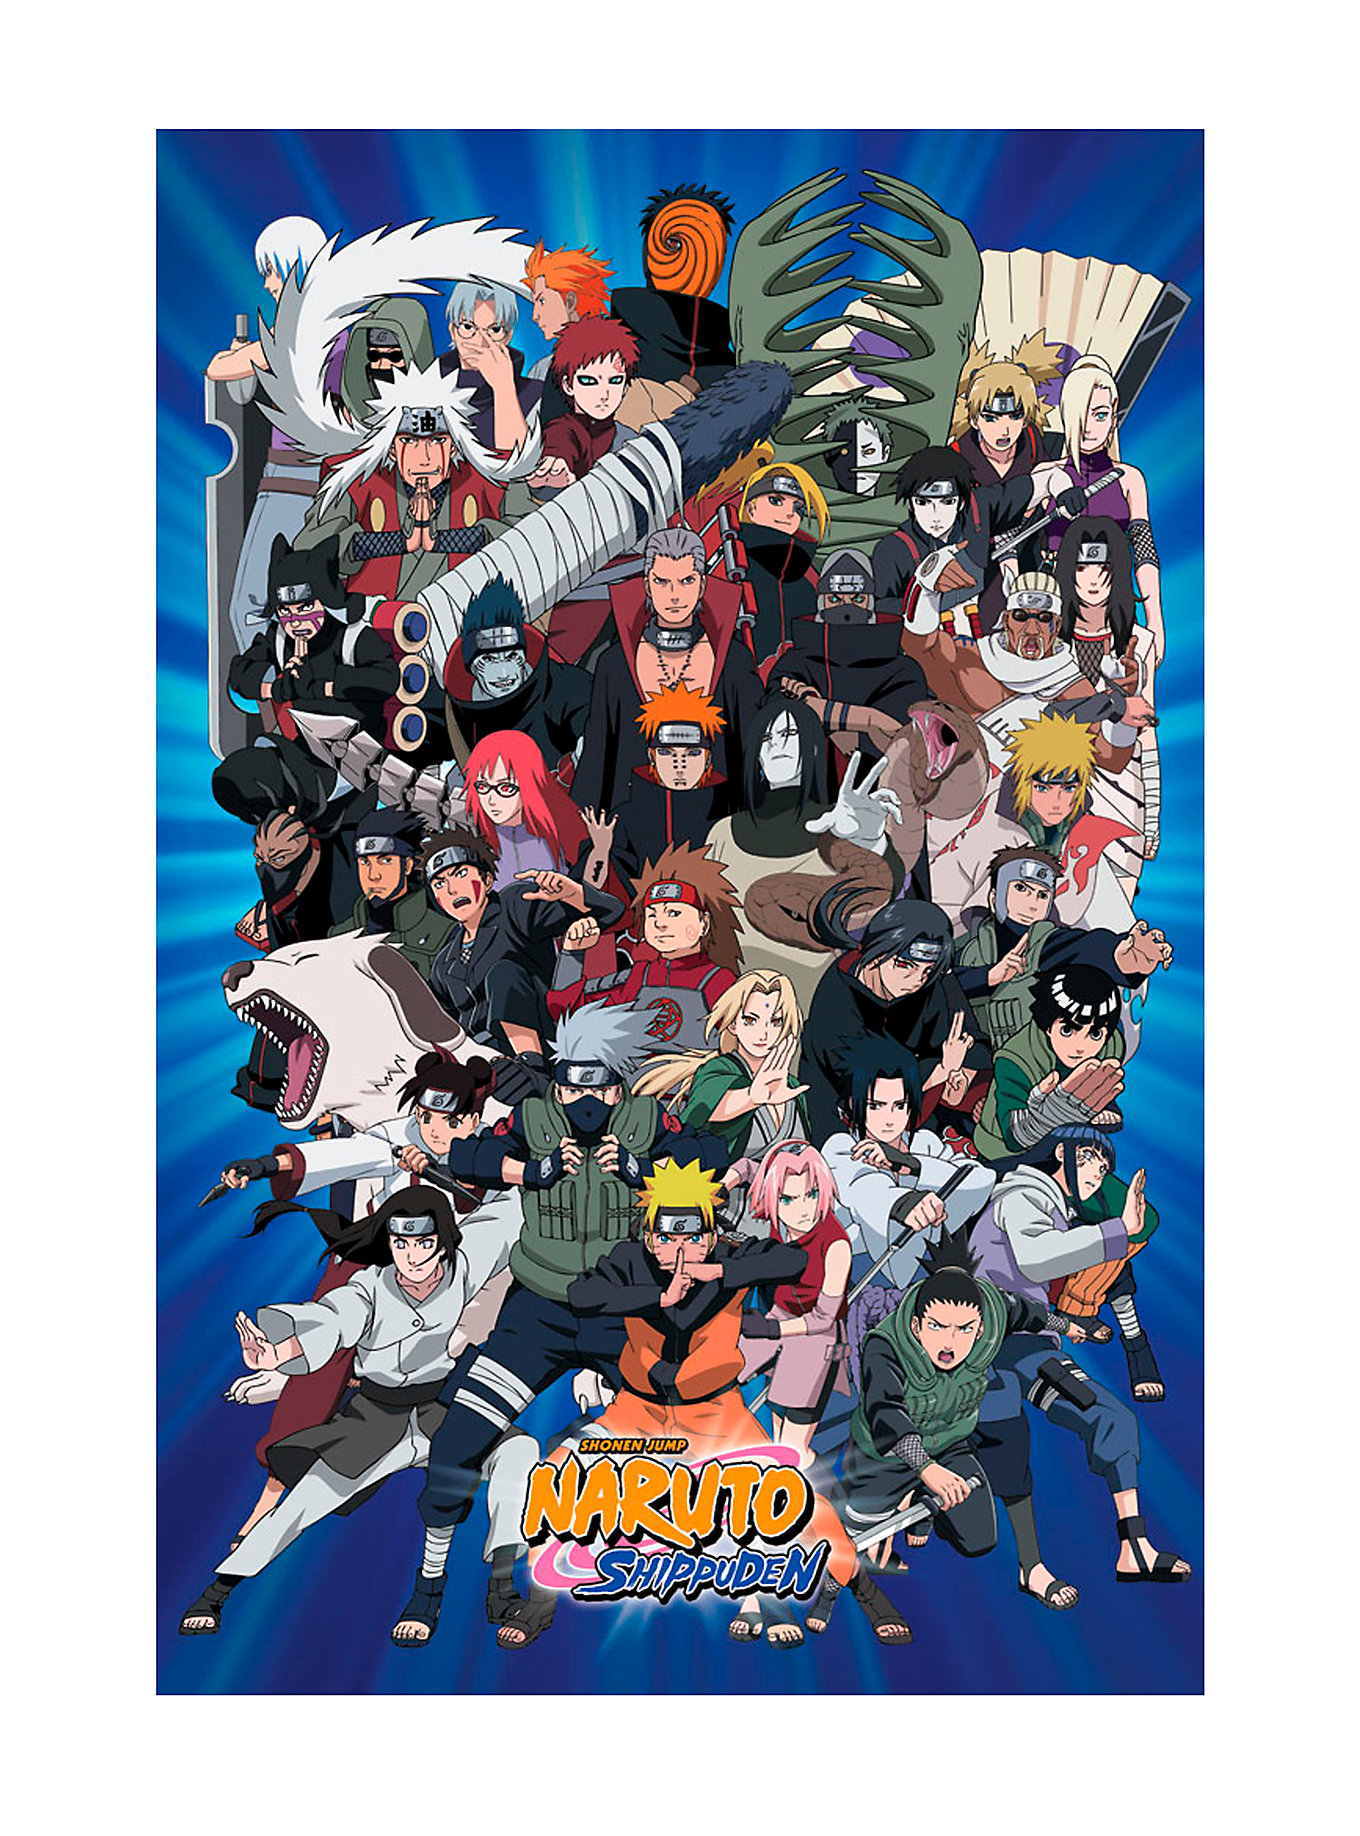 Naruto Shippuden all characters Poster - Anime Photo (39649843) - Fanpop